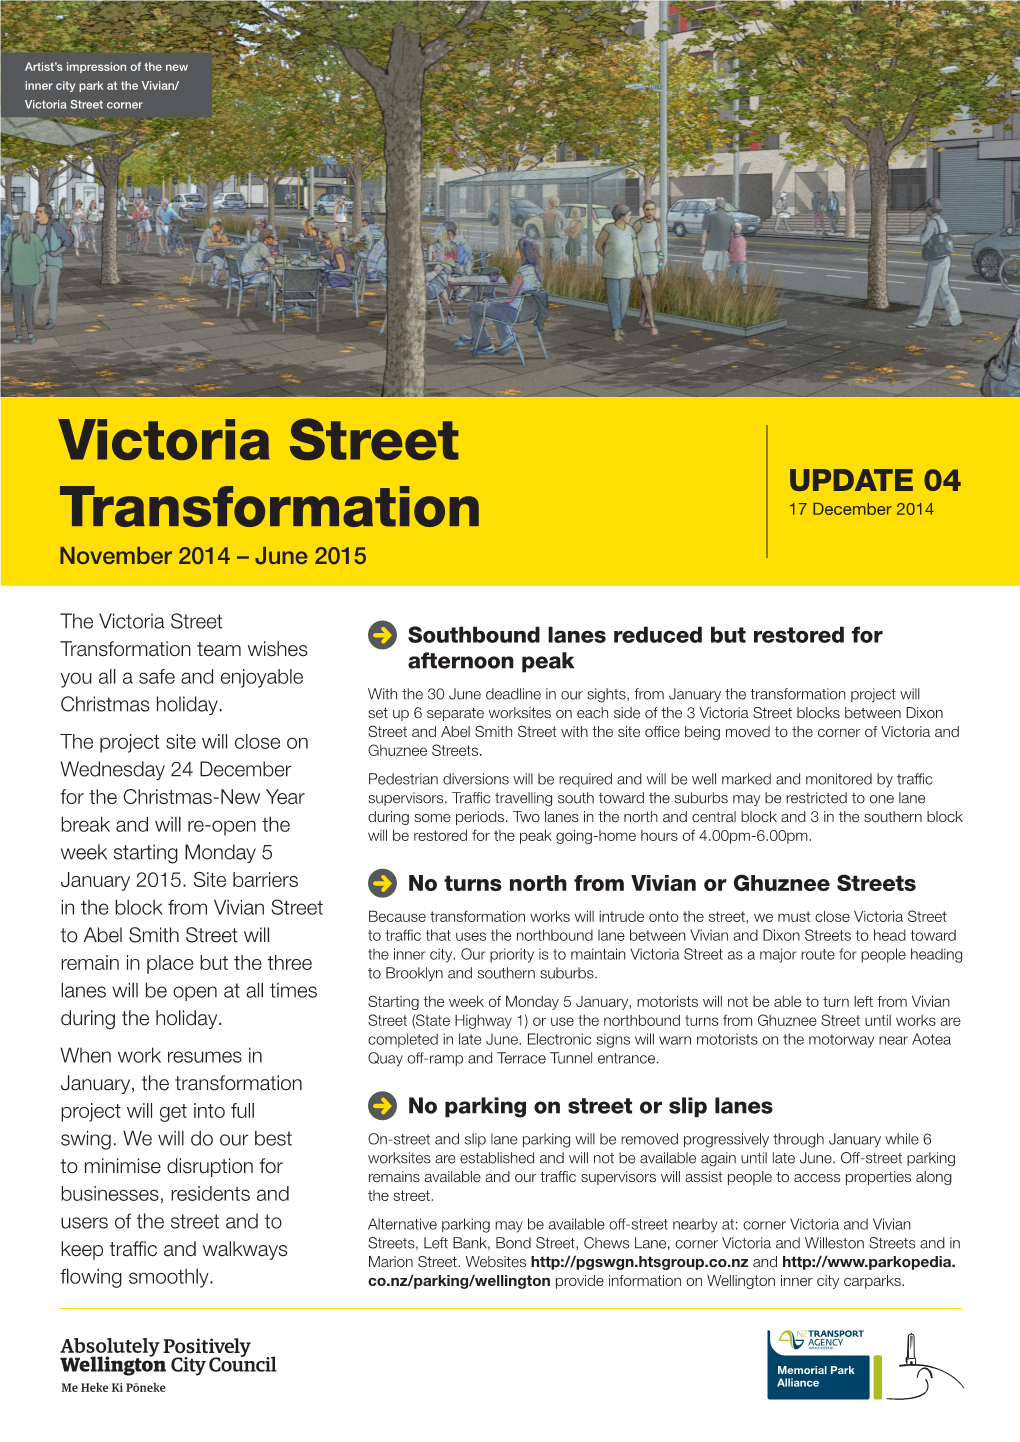 Victoria Street Transformation Should Prevent the Need to Remove Mature Trees in the Future